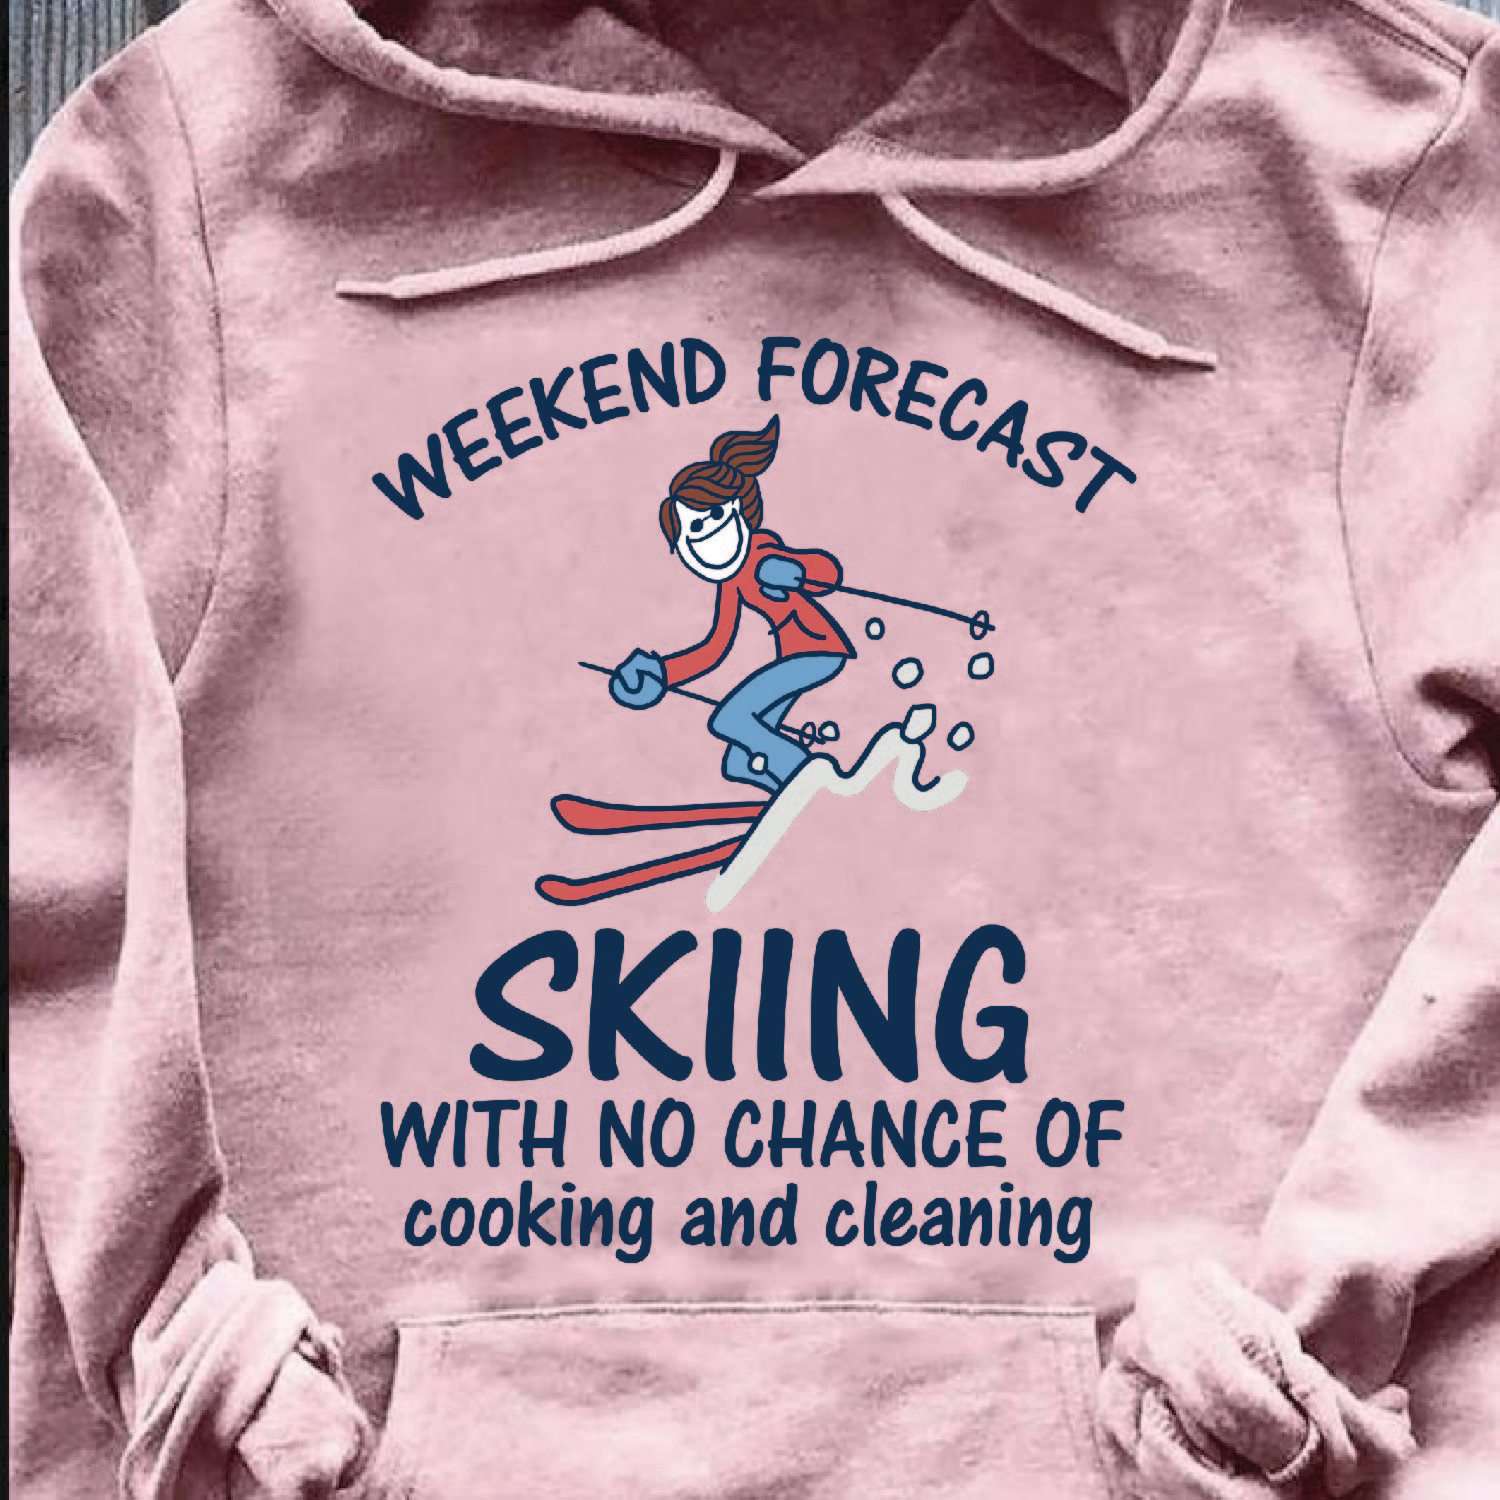 Weekend forecast skiing with no chance of cooking and cleaning - Girl go skiing, funny skiing sport